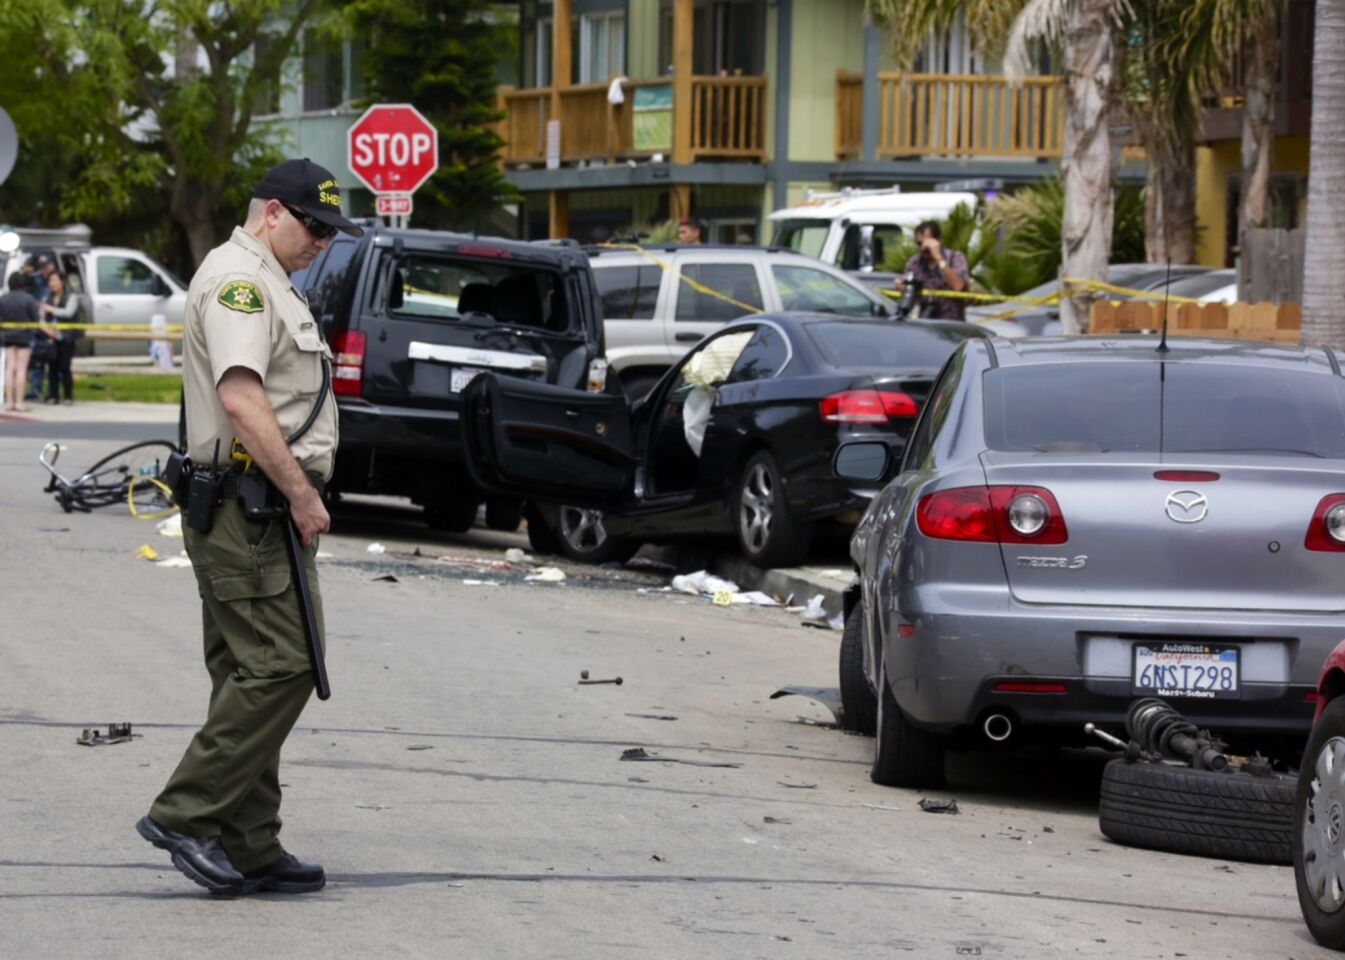 A street in Isla Vista where the car driven by the gunman crashed.